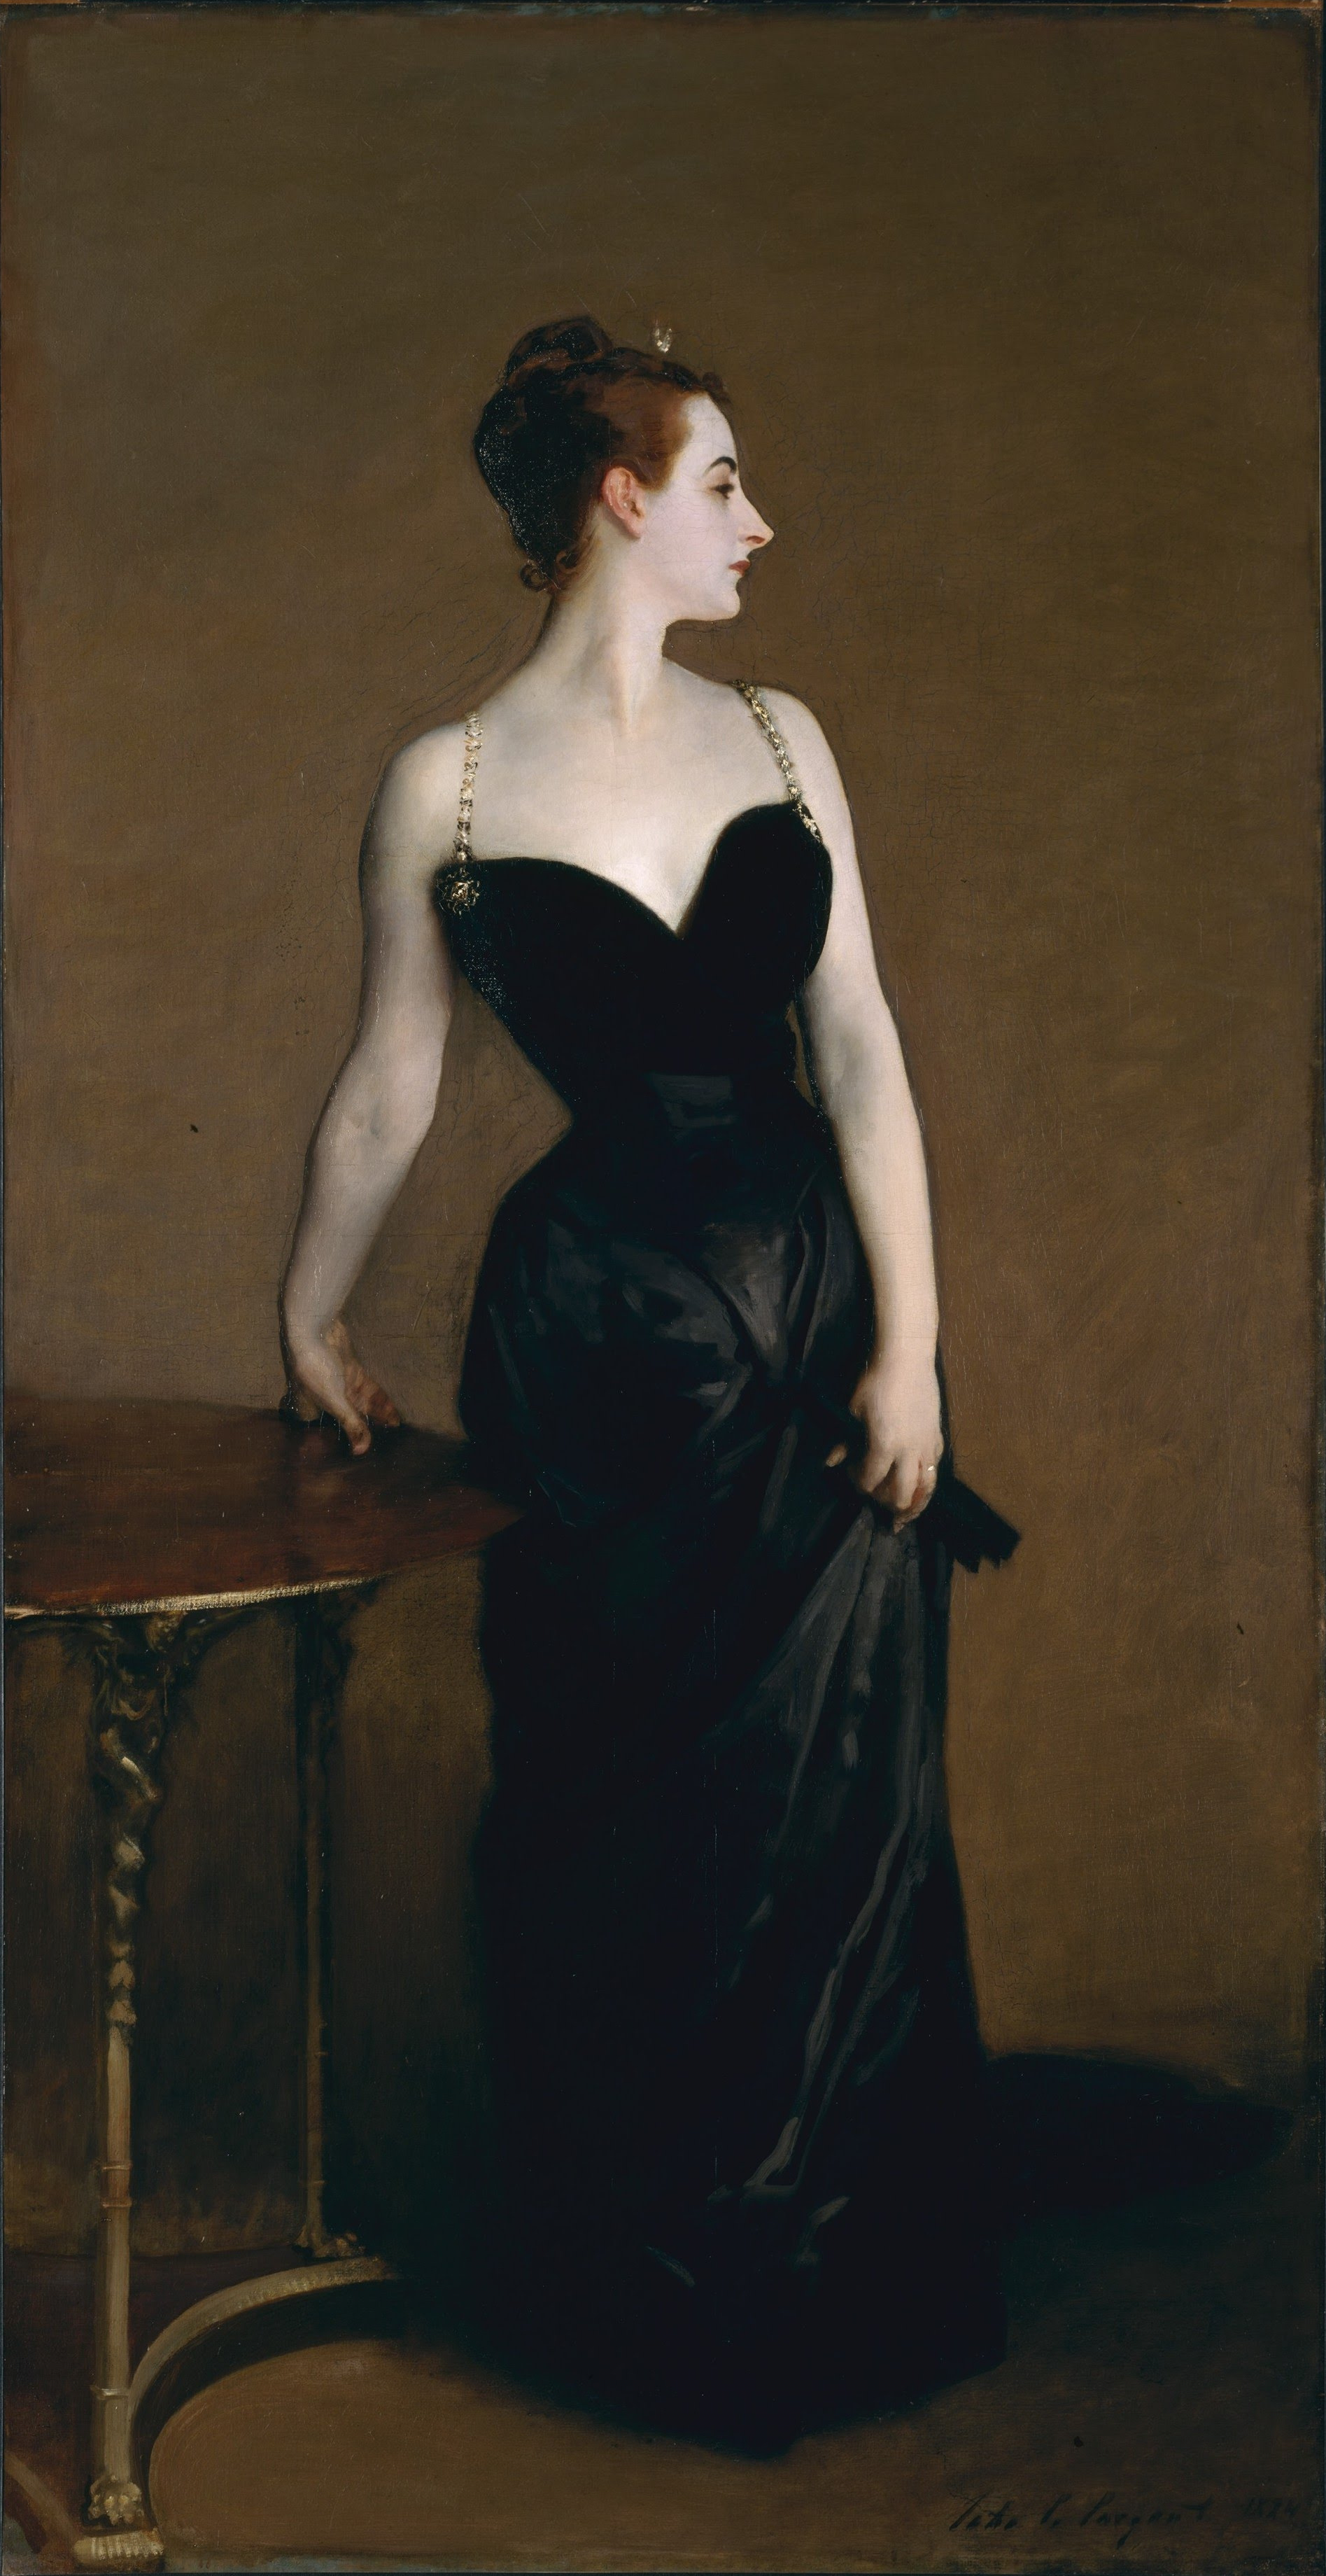 Image of painting "Madam X" by John Singer Sargent